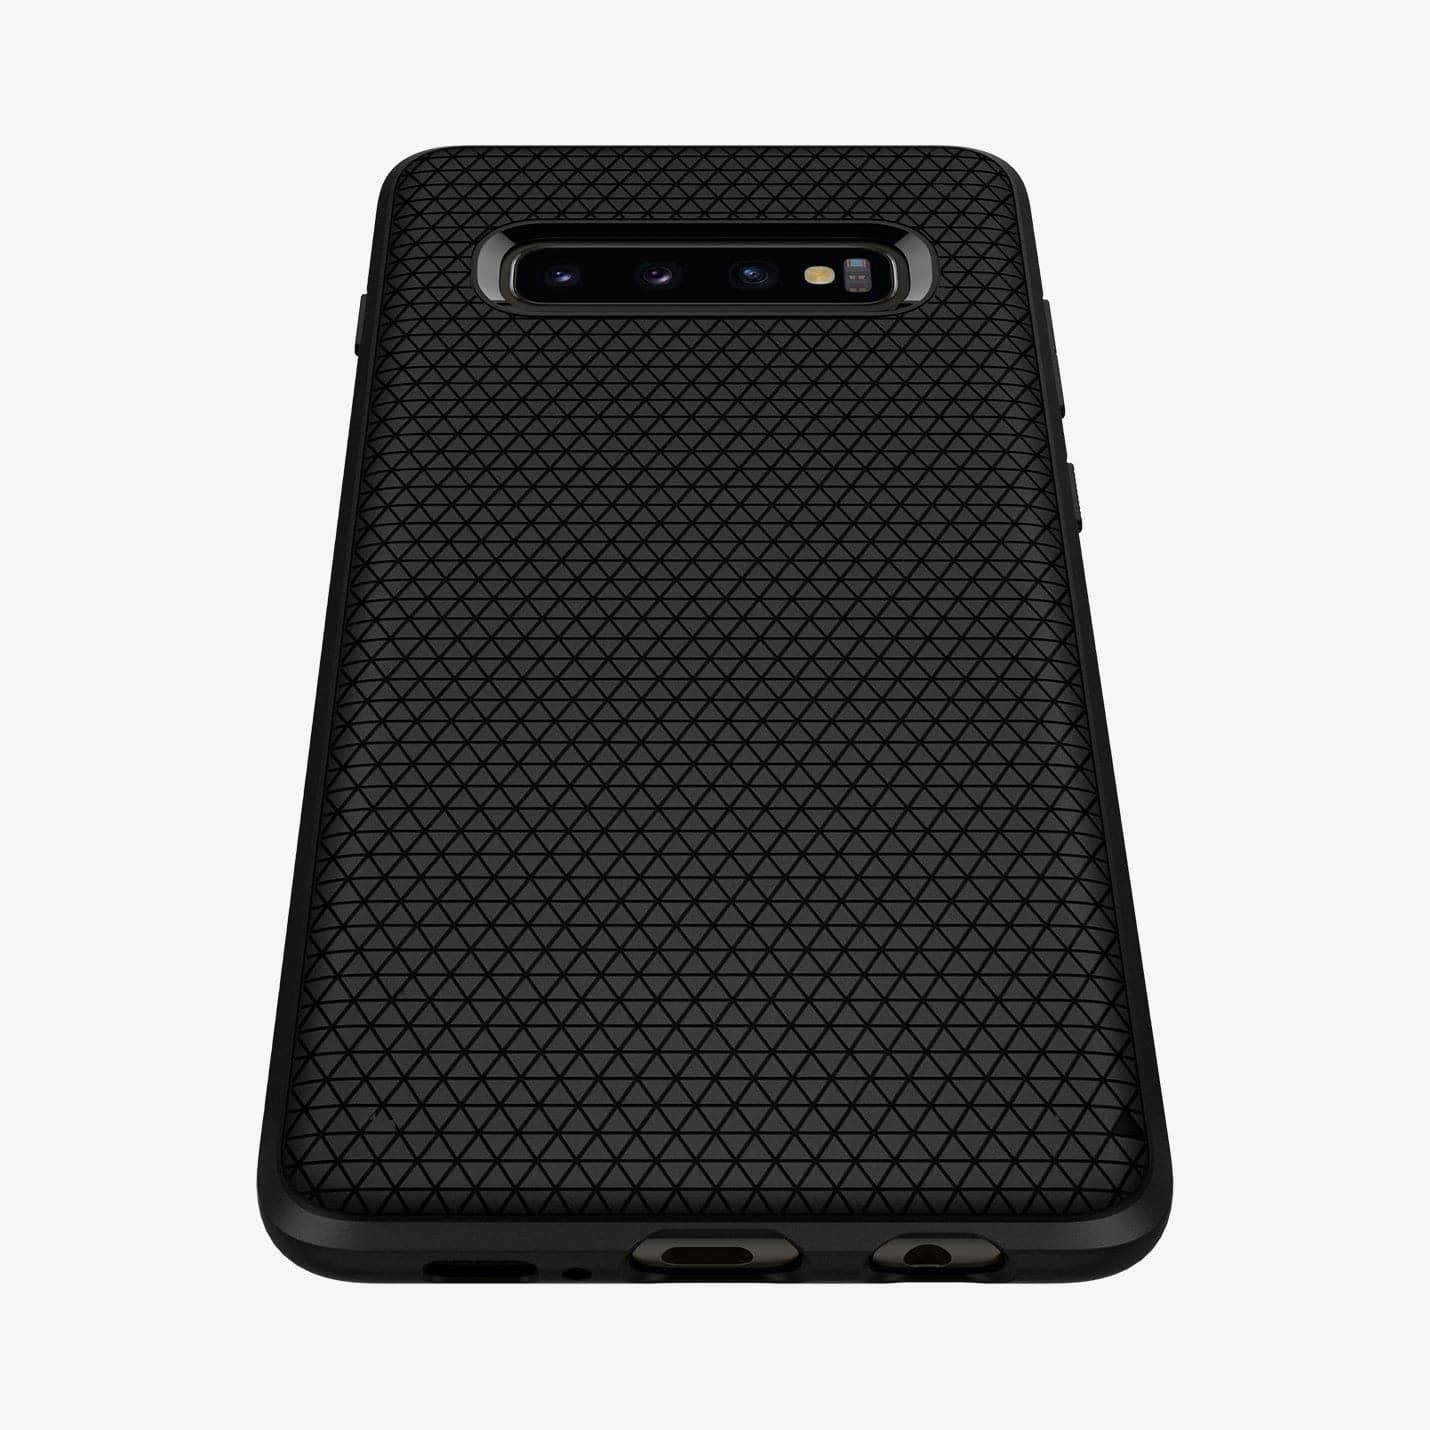 606CS25764 - Galaxy S10 Plus Liquid Air Case in black showing the back and bottom zoomed in